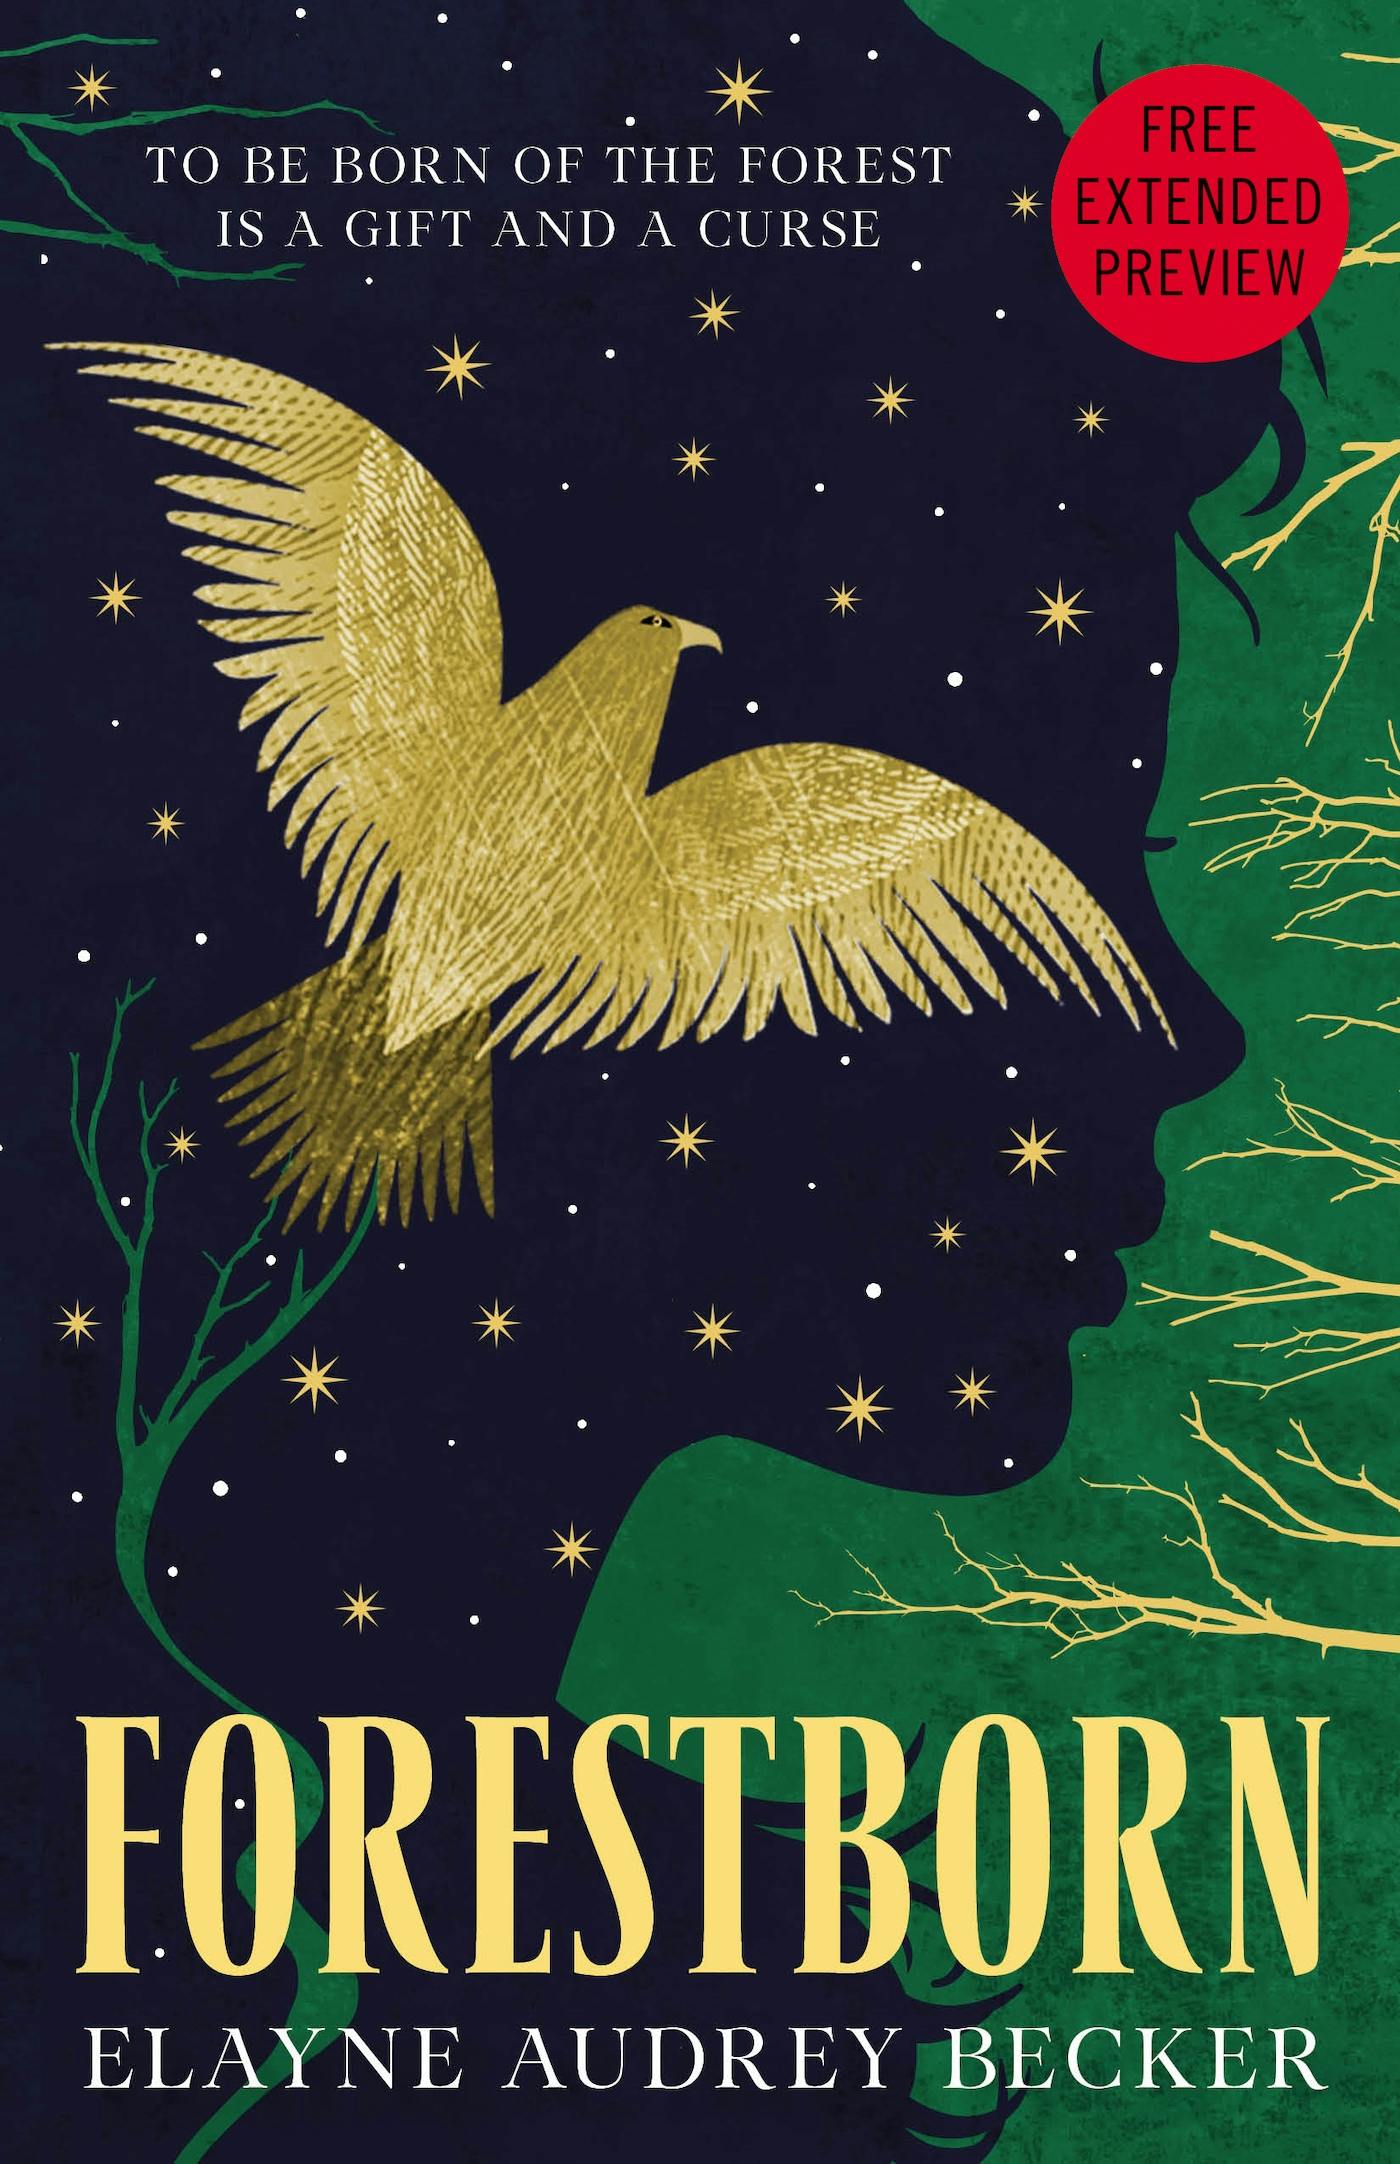 Cover for the book titled as: Forestborn Sneak Peek